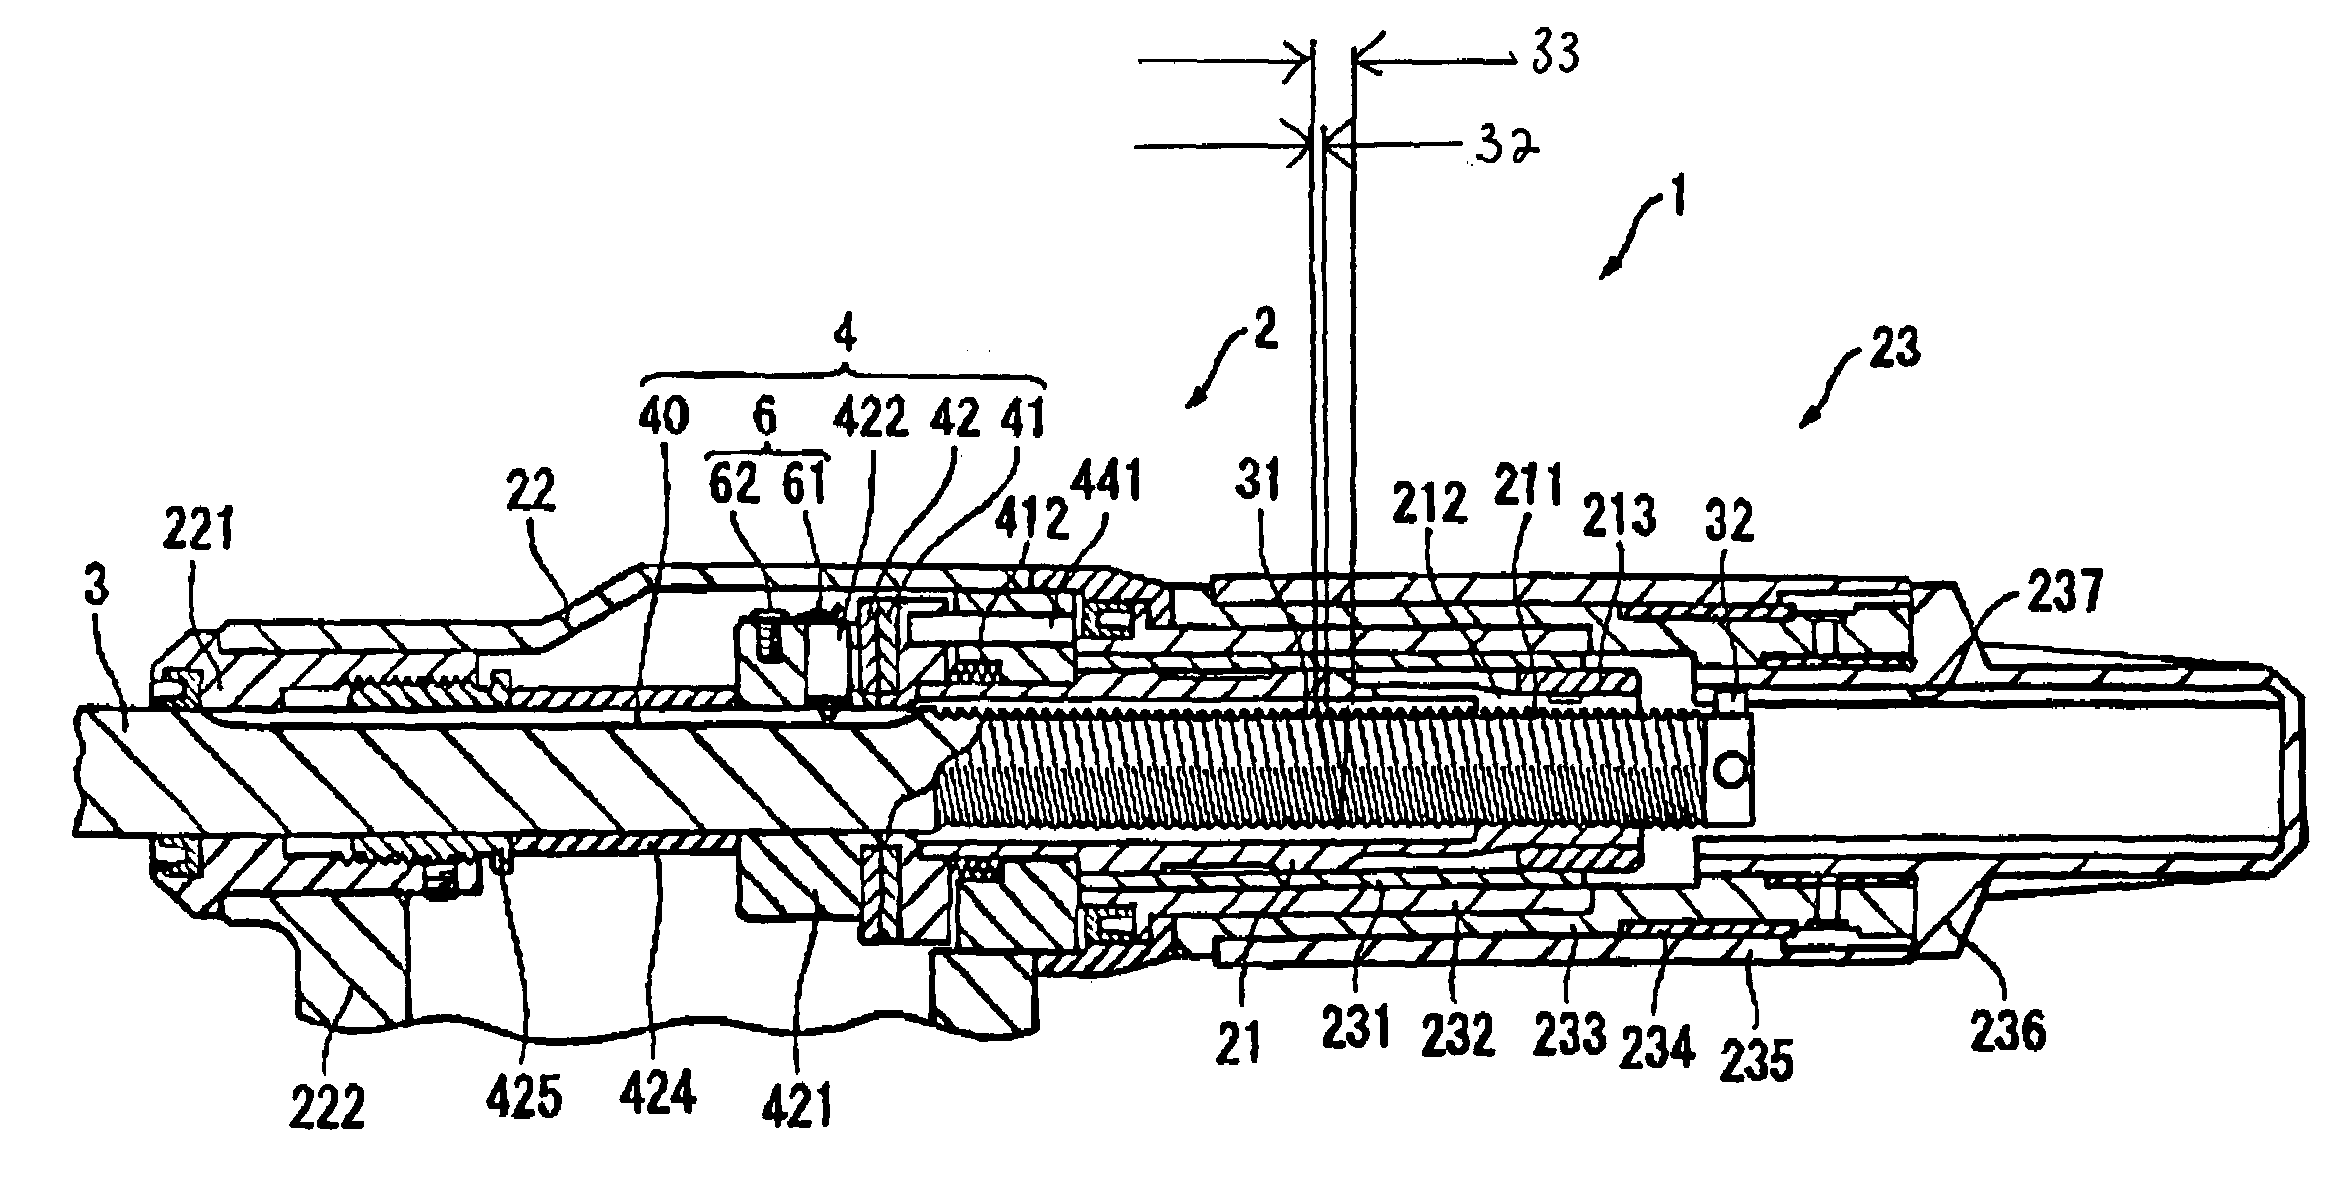 Measuring device using multi-start threaded spindle